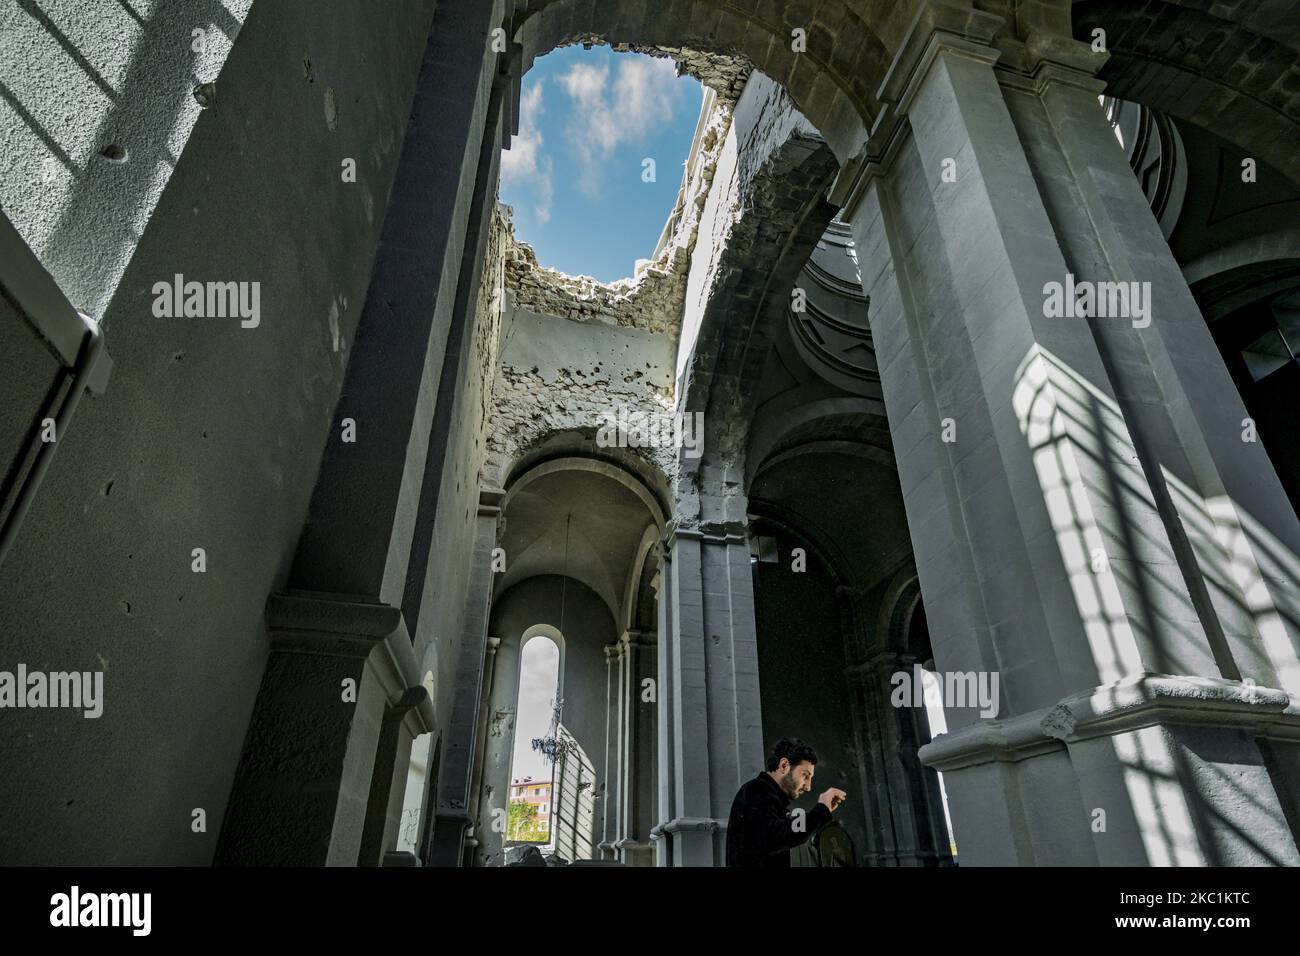 Huge hole in the ceiling of the Ghazanchetsots Cathedral in Shushi, Nagorno Karabakh, after the Azerbaijan shelling in a double attack to the building on October 11, 2020. (Photo by Celestino Arce/NurPhoto) Stock Photo